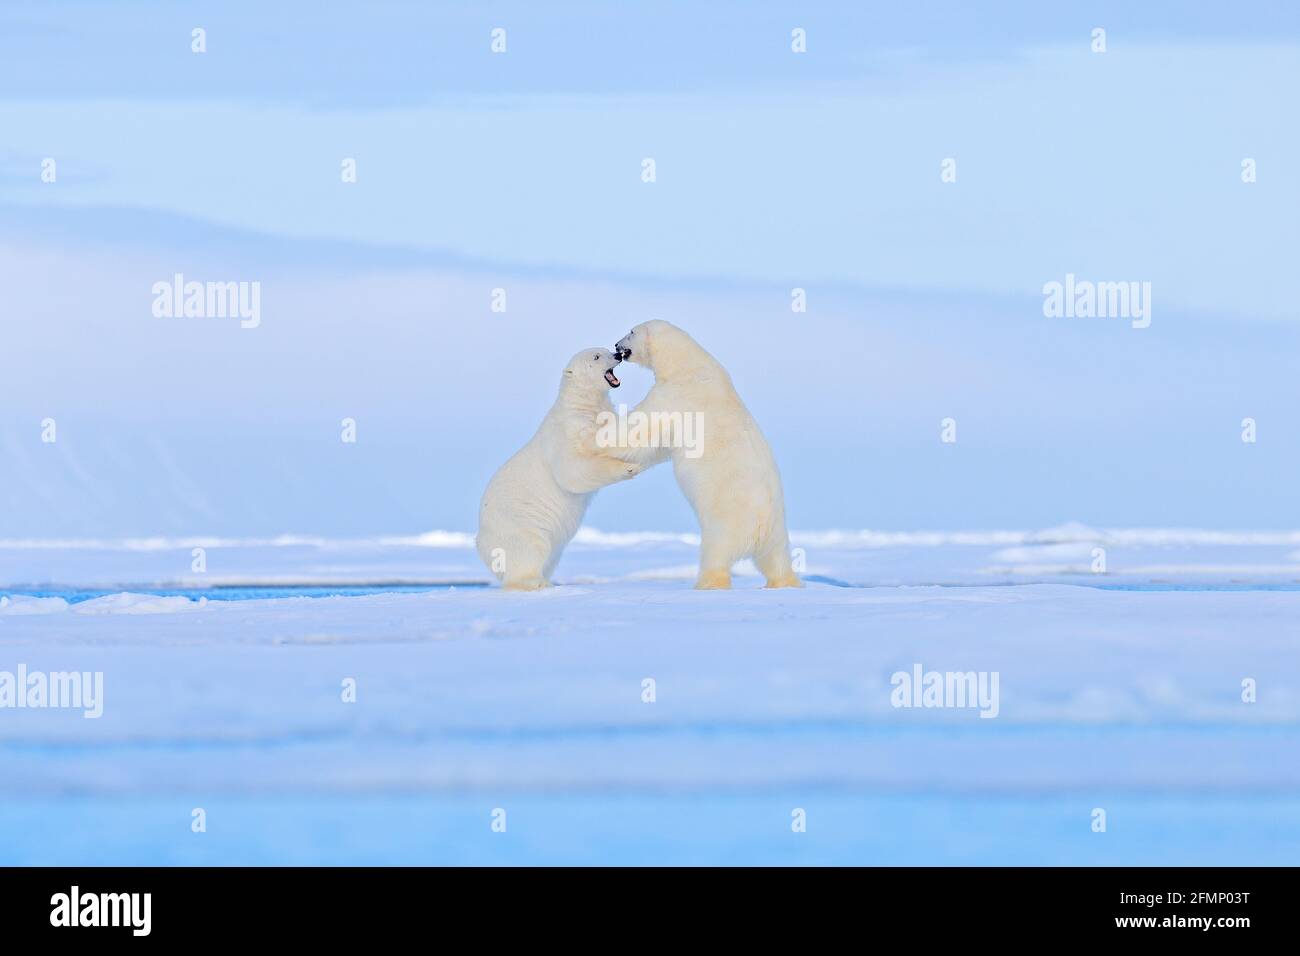 Polar bear dancing fight on the ice. Two bears love on drifting ice with snow, white animals in nature habitat, Svalbard, Norway. Animals playing in s Stock Photo